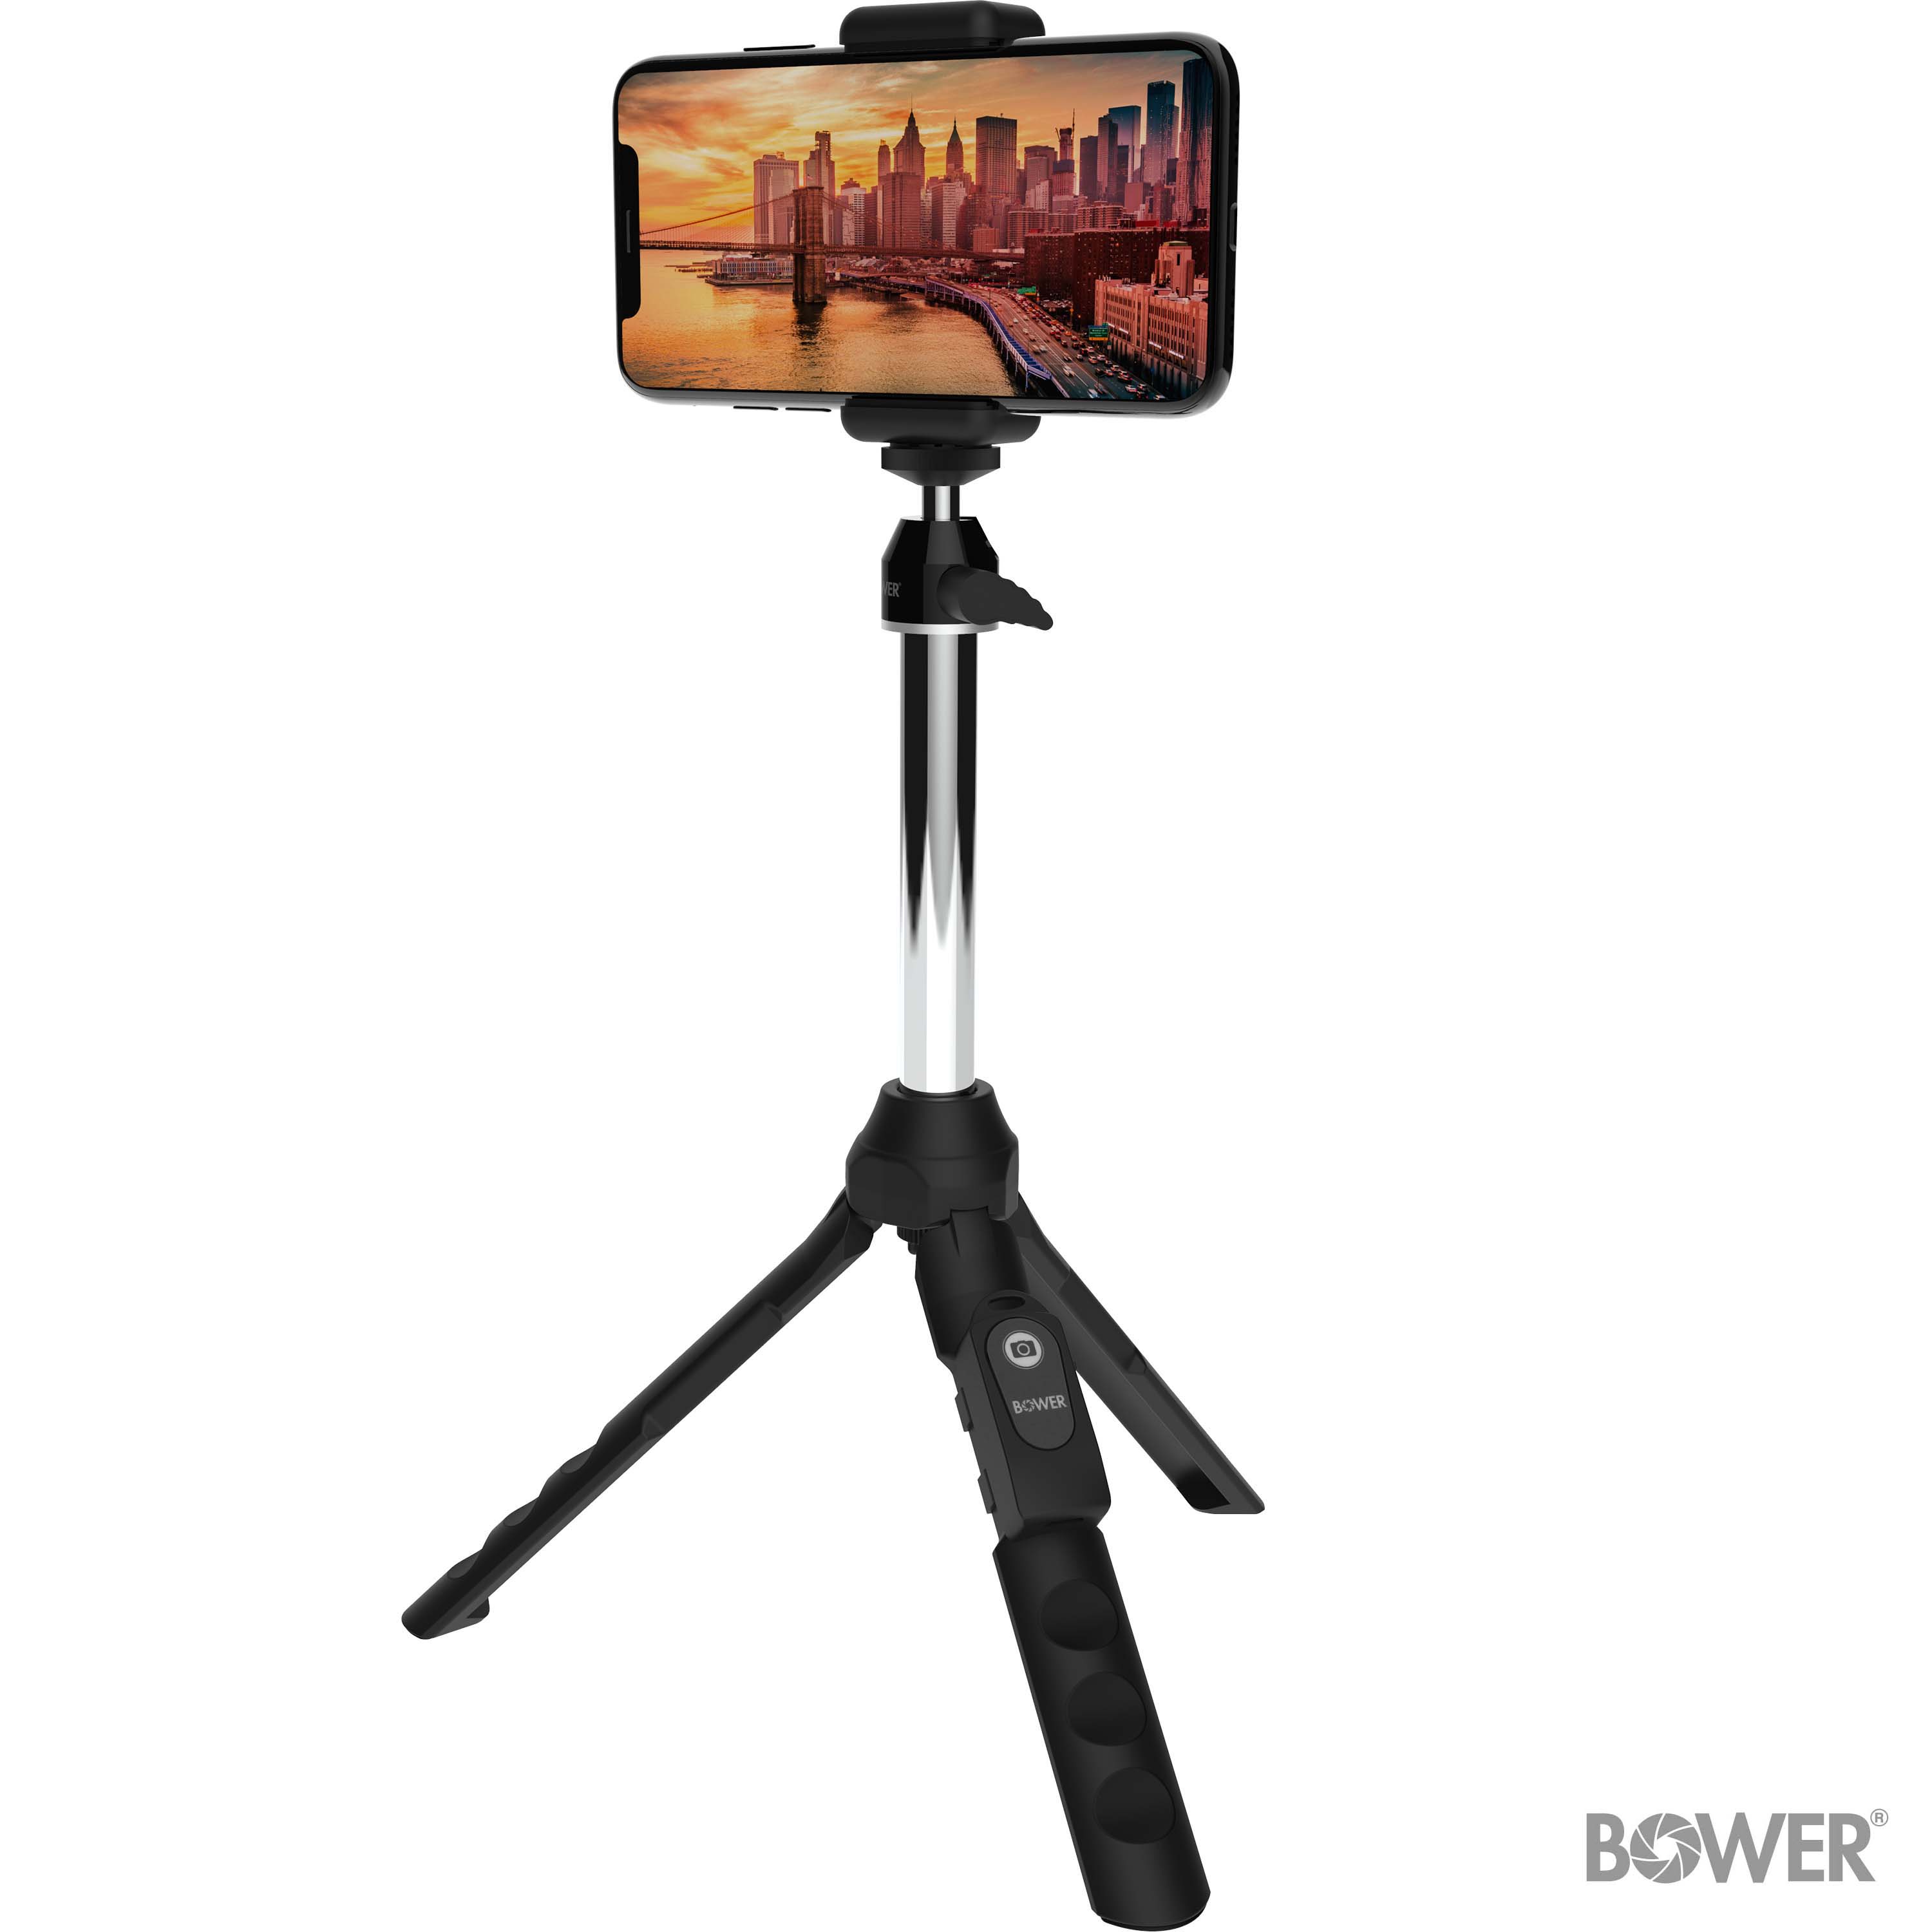 Bower 6 -in-1 Multi Selfie Tripod with Smartphone, GoPro Mount, and Rechargeable Wireless Remote, Black - image 3 of 7